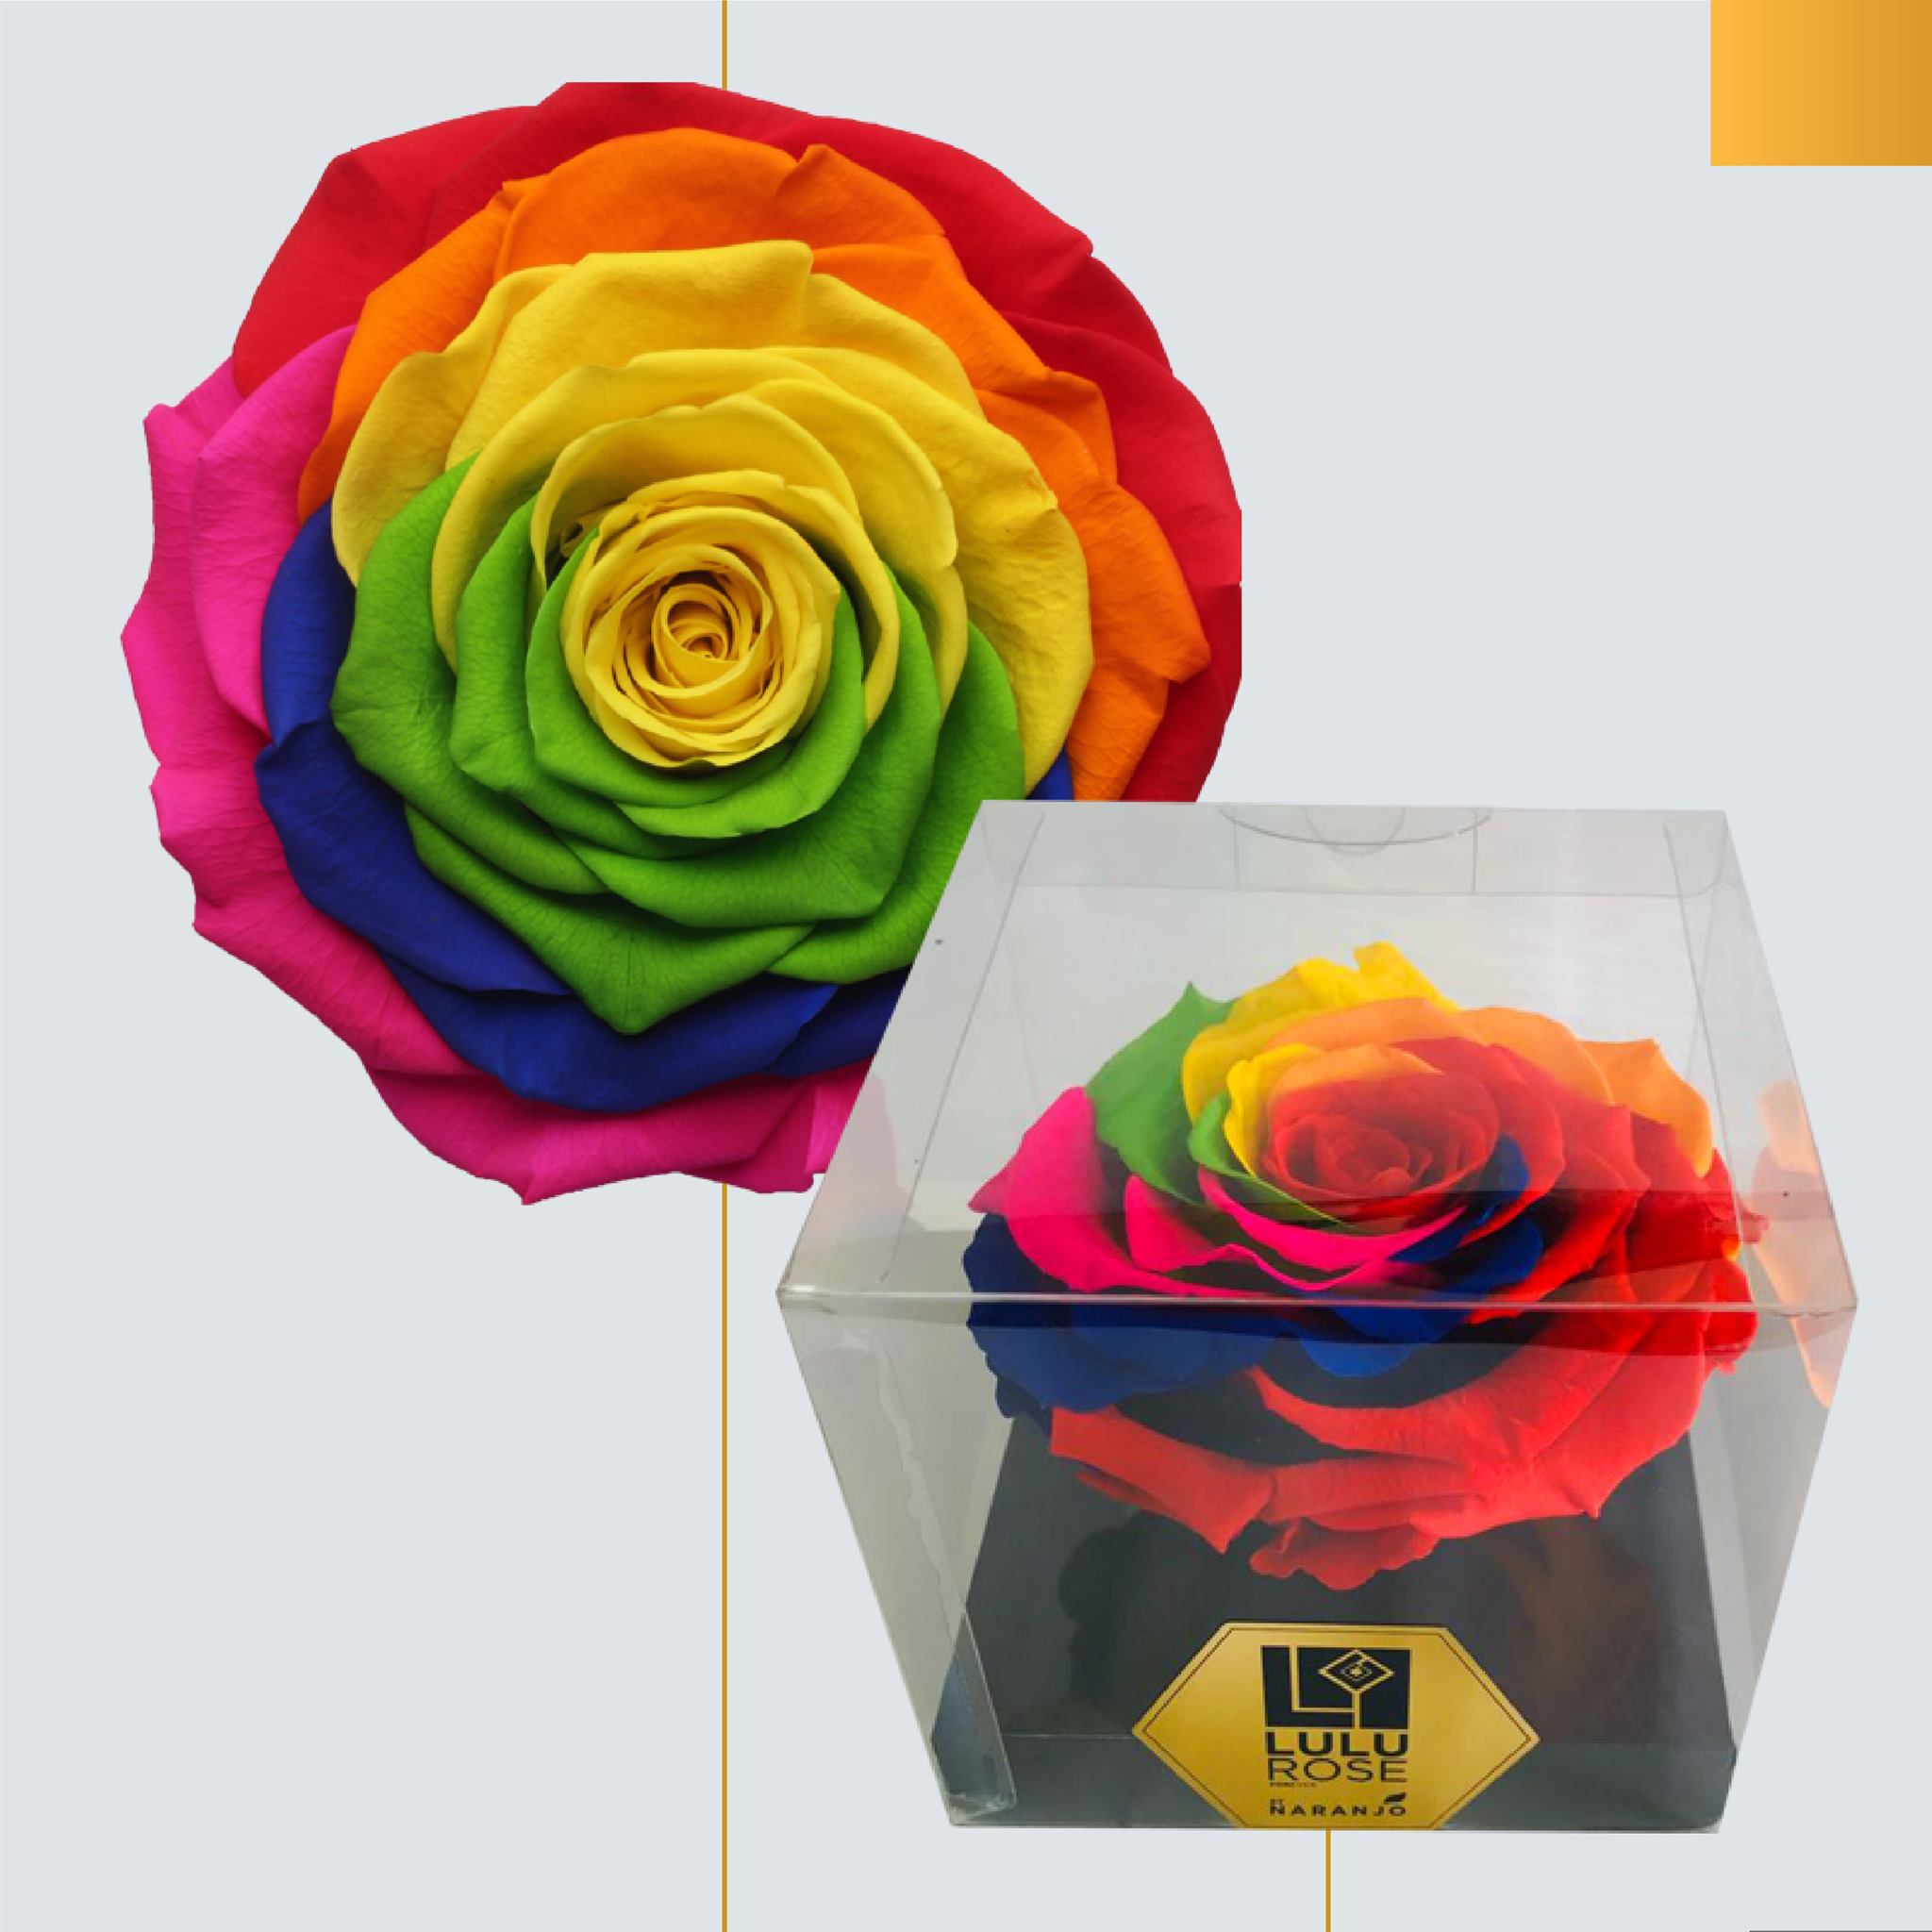 Tinted Rainbow Roses for Pride - prestige rose collection - rainbow rose - naranjo roses article on thursd